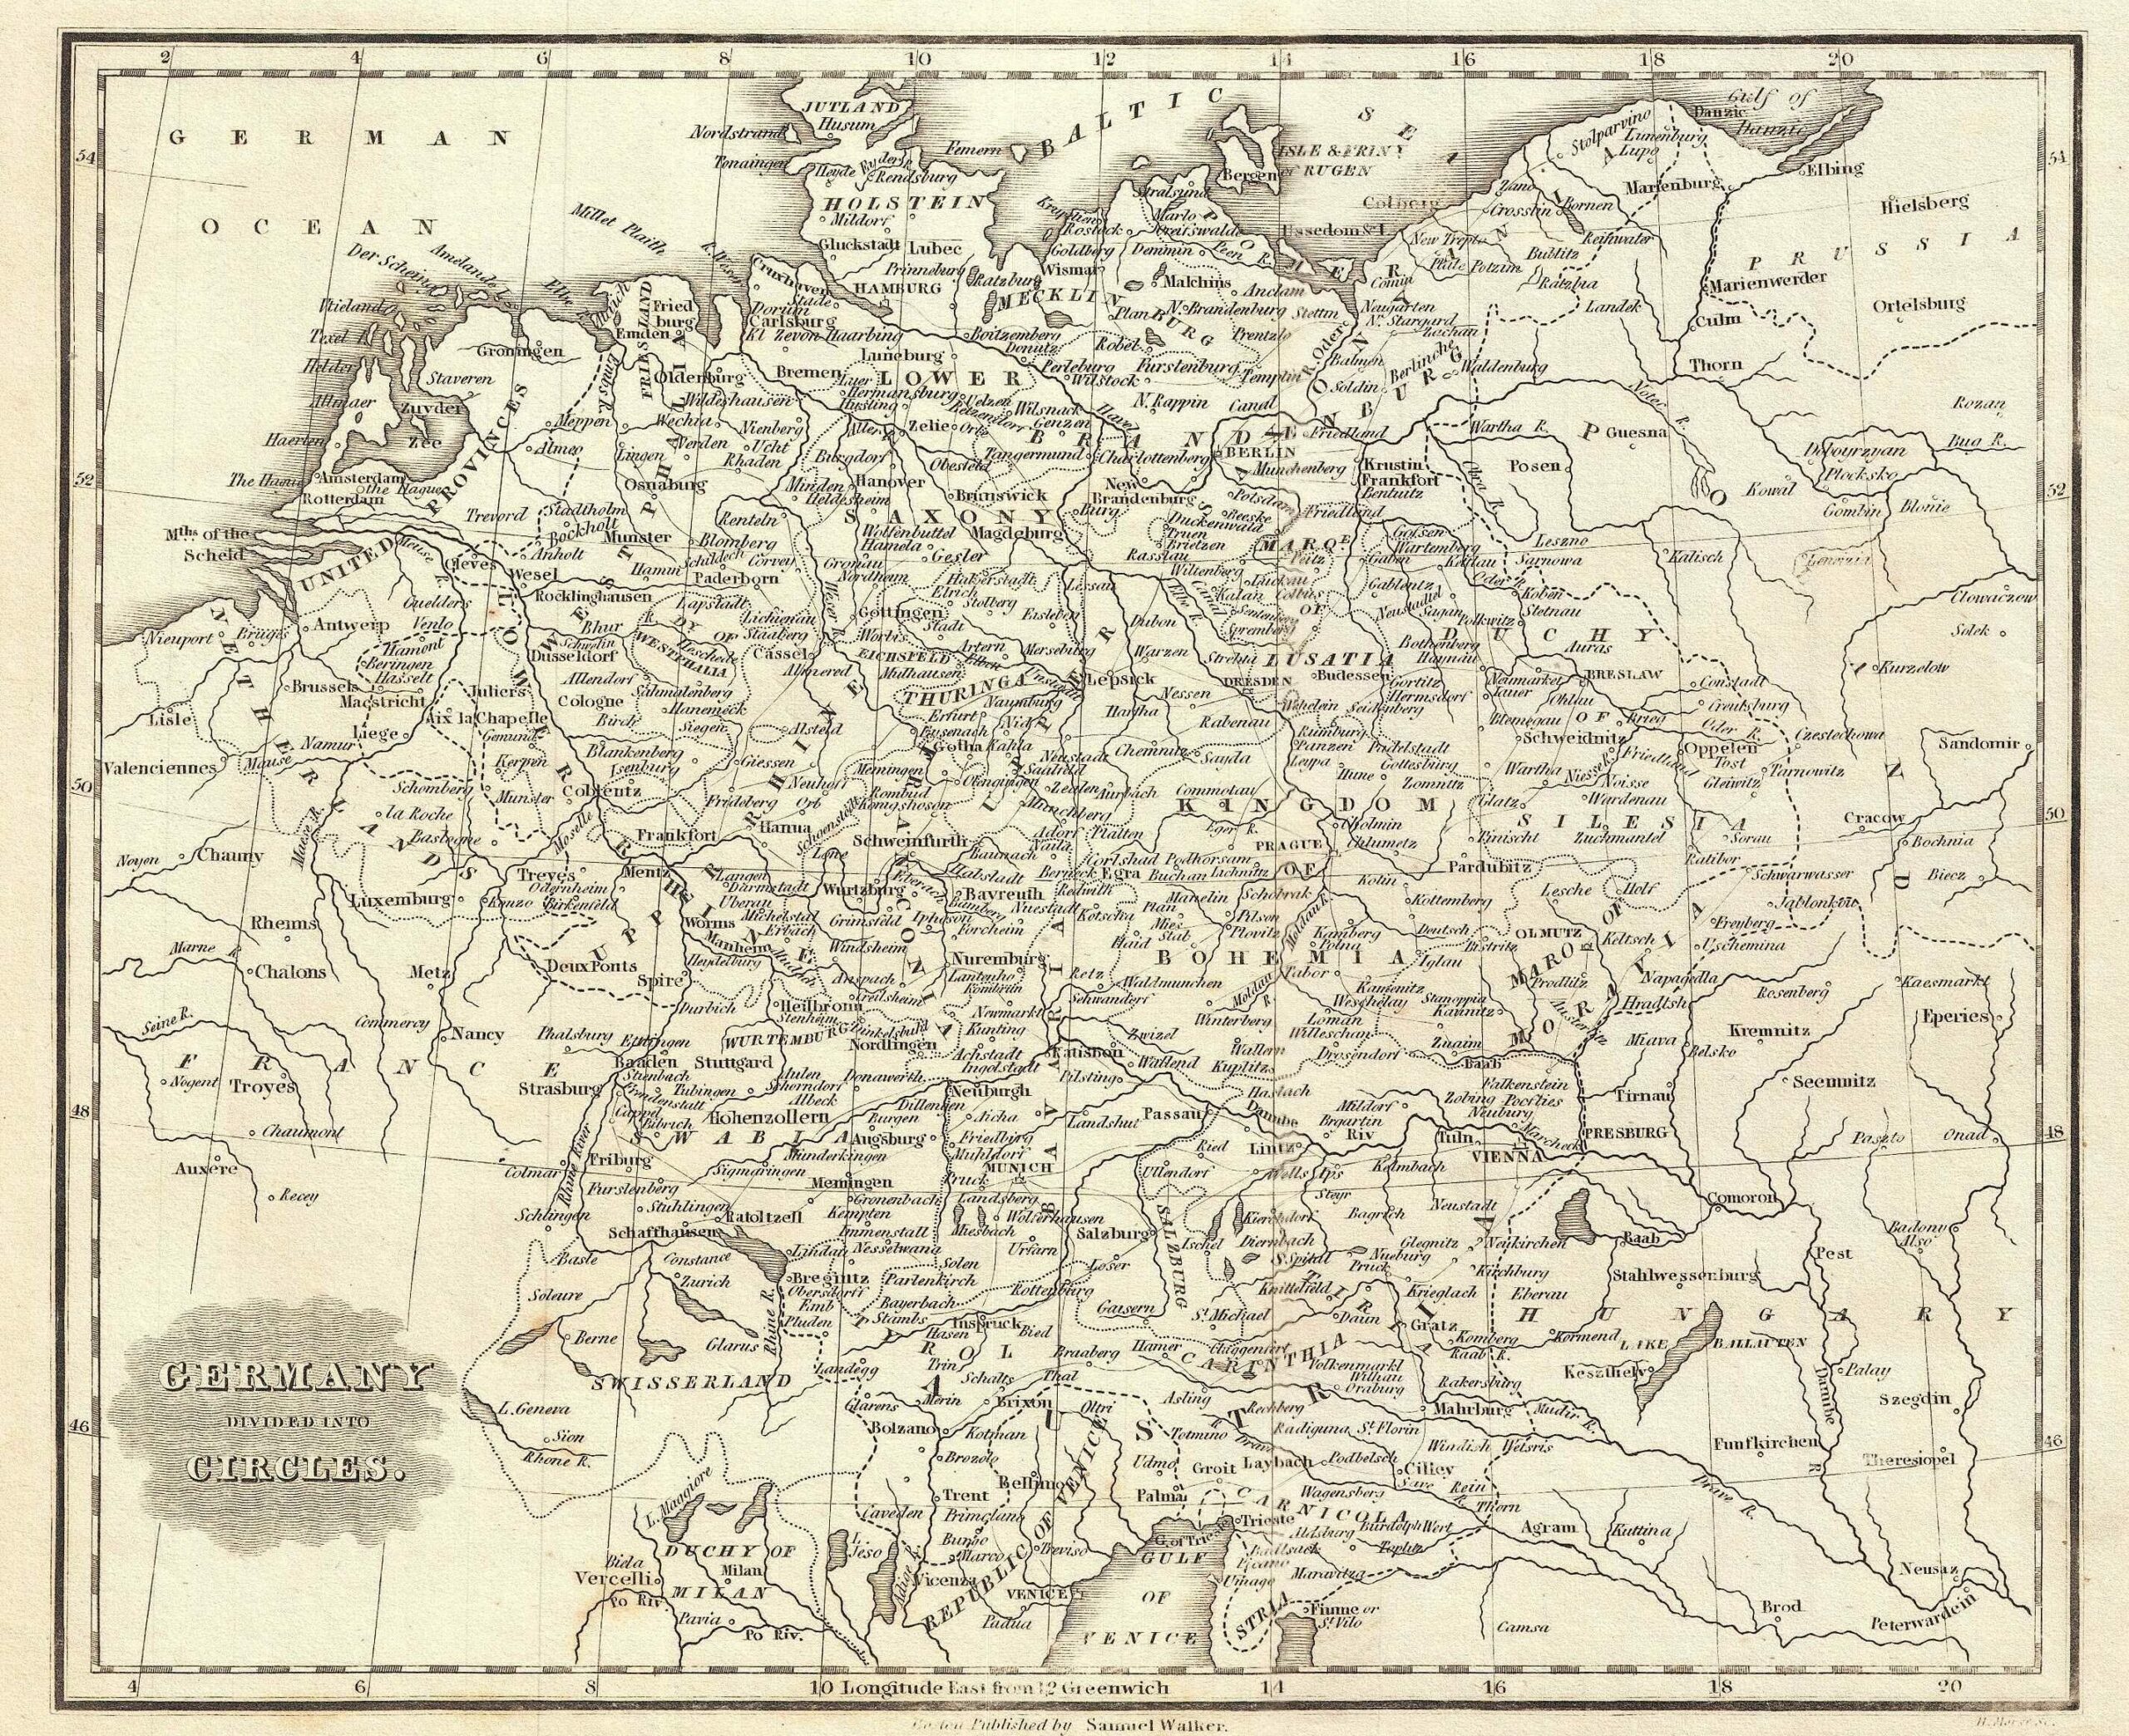 1828 map of central Europe